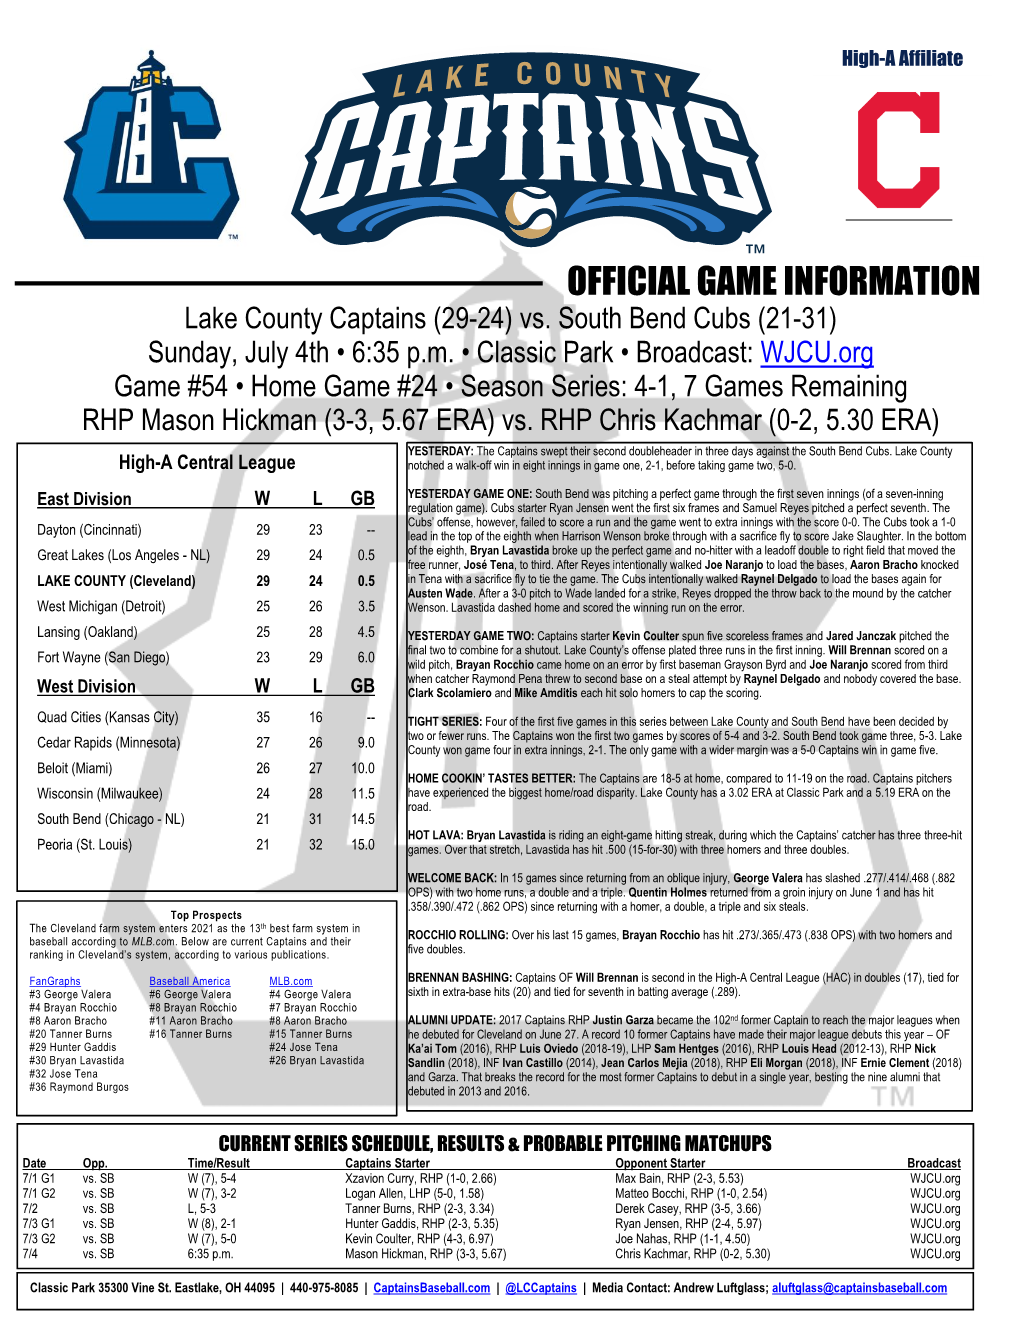 OFFICIAL GAME INFORMATION Lake County Captains (29-24) Vs